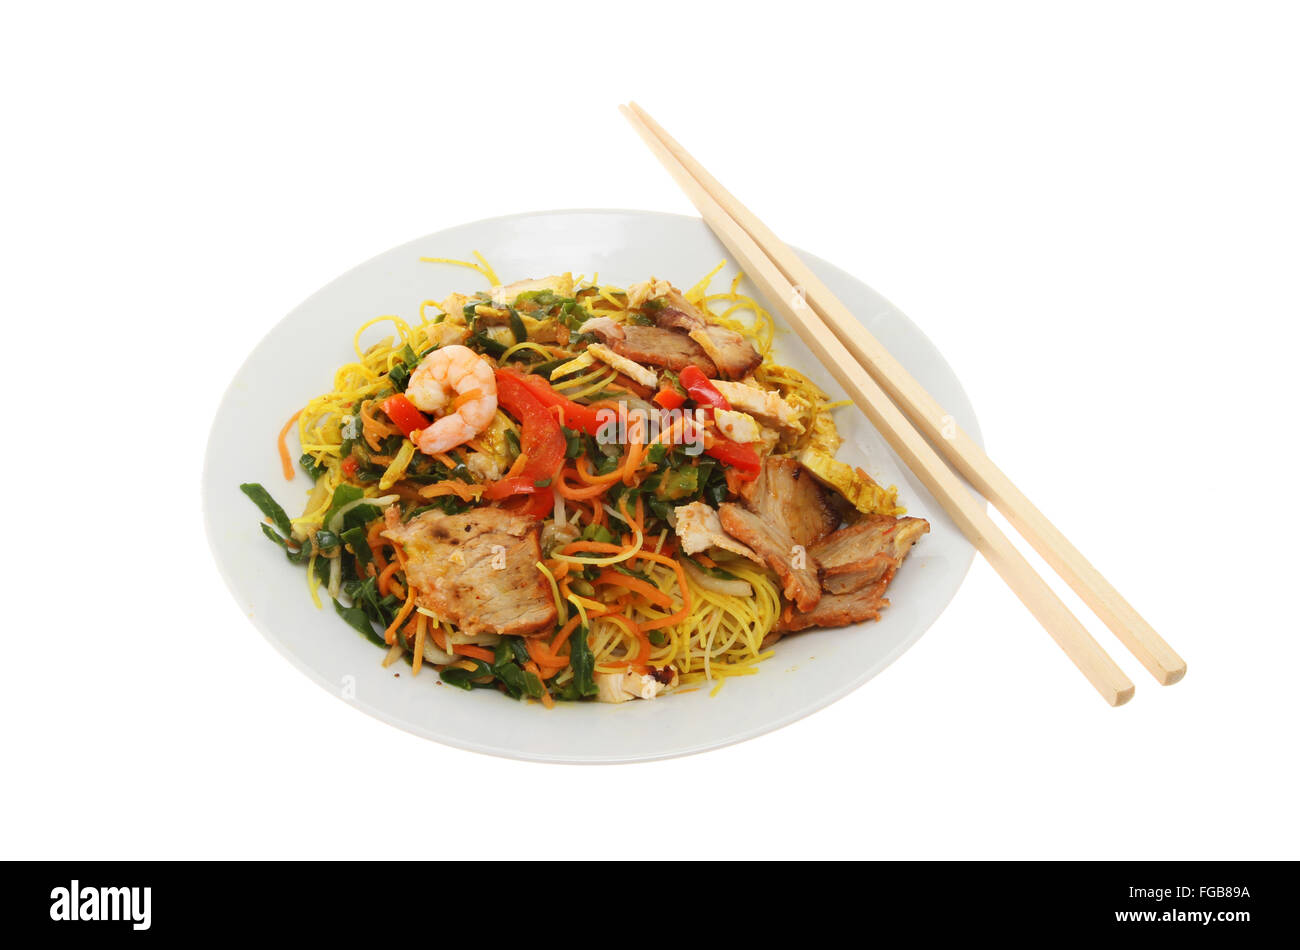 Chinese meal, Singapore noodles in a bowl with chopsticks isolated against white Stock Photo